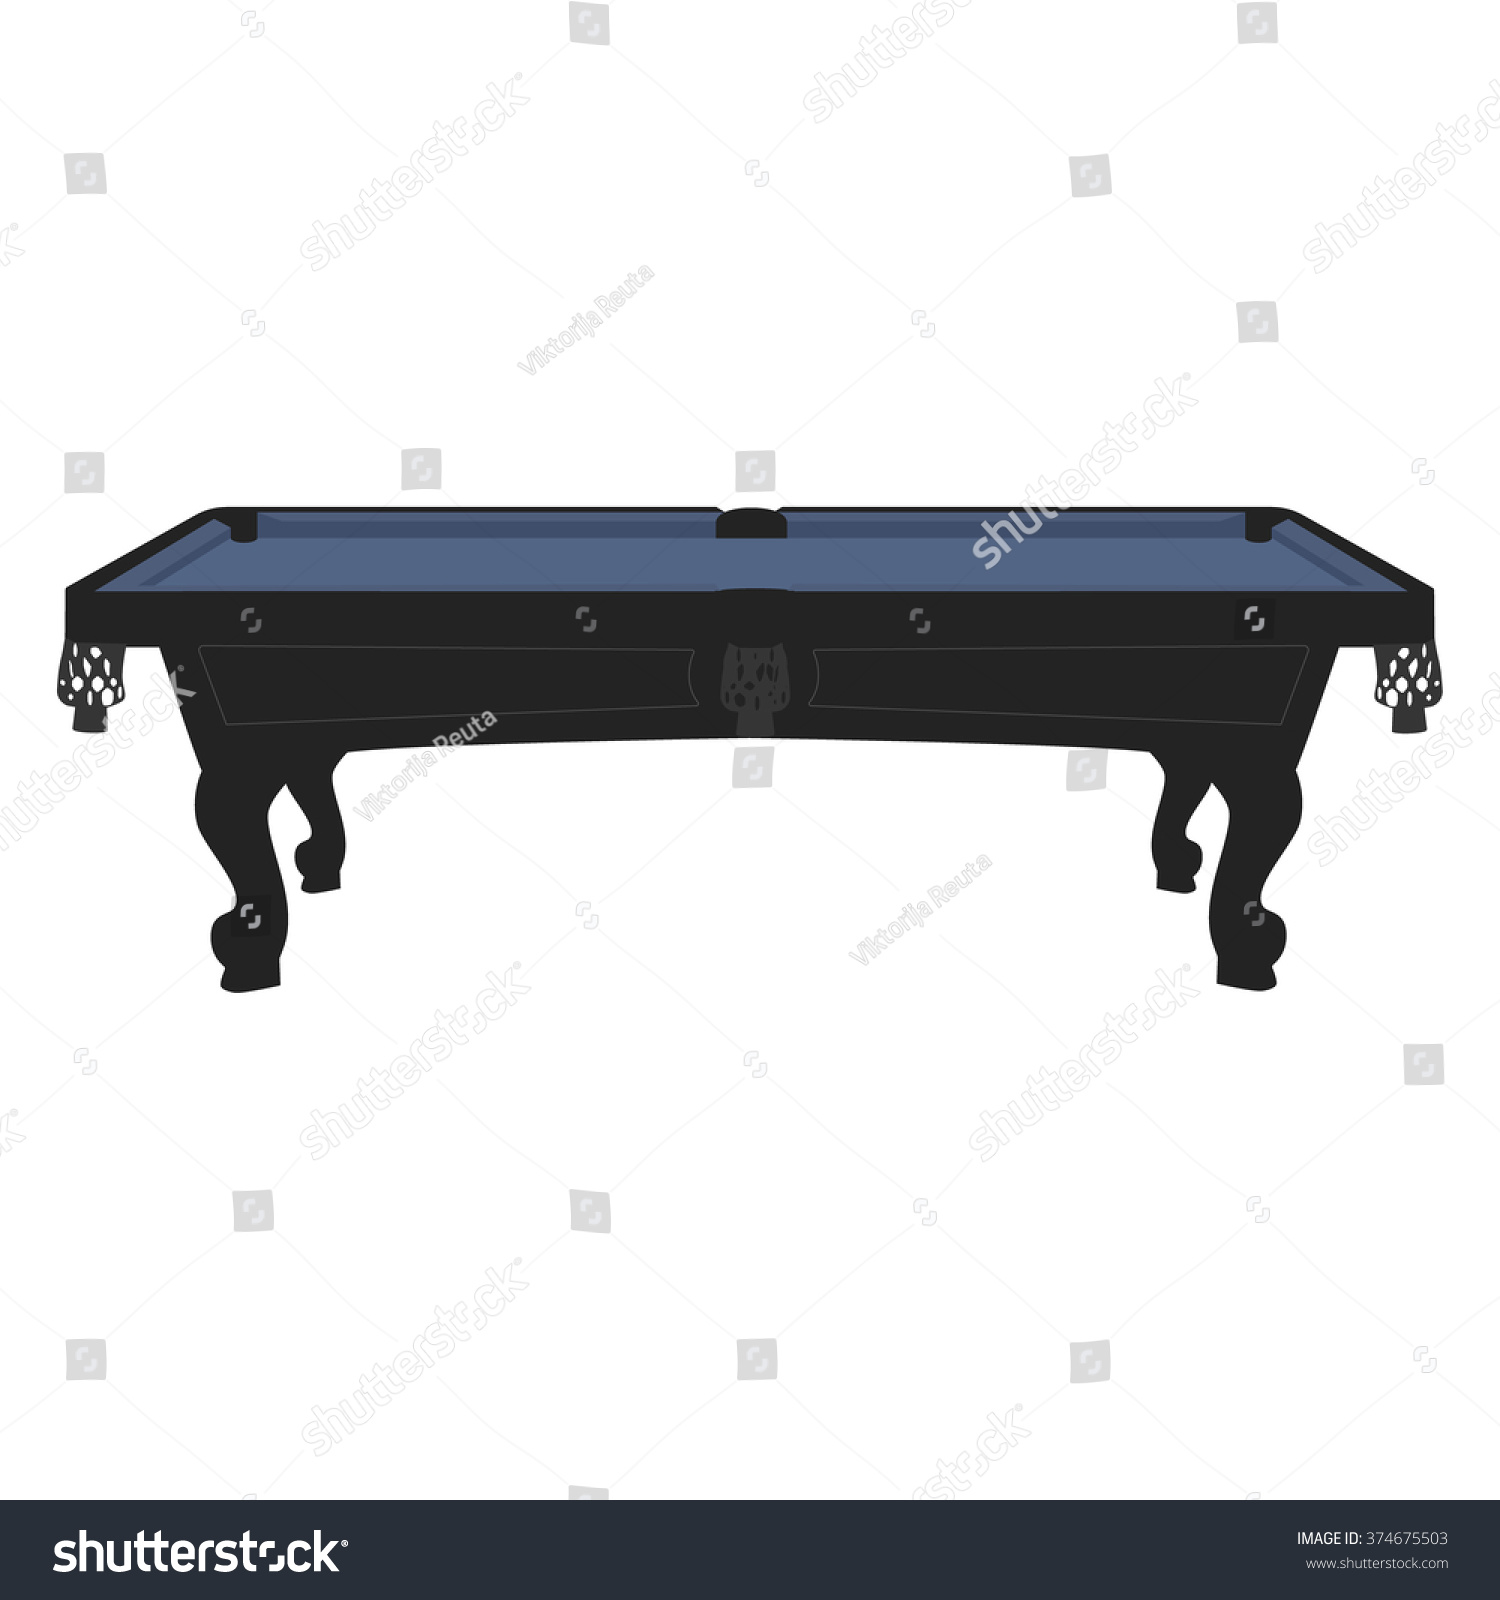 SVG of Vector illustration retro, vintage pool table with blue cloth. Empty billiard table svg